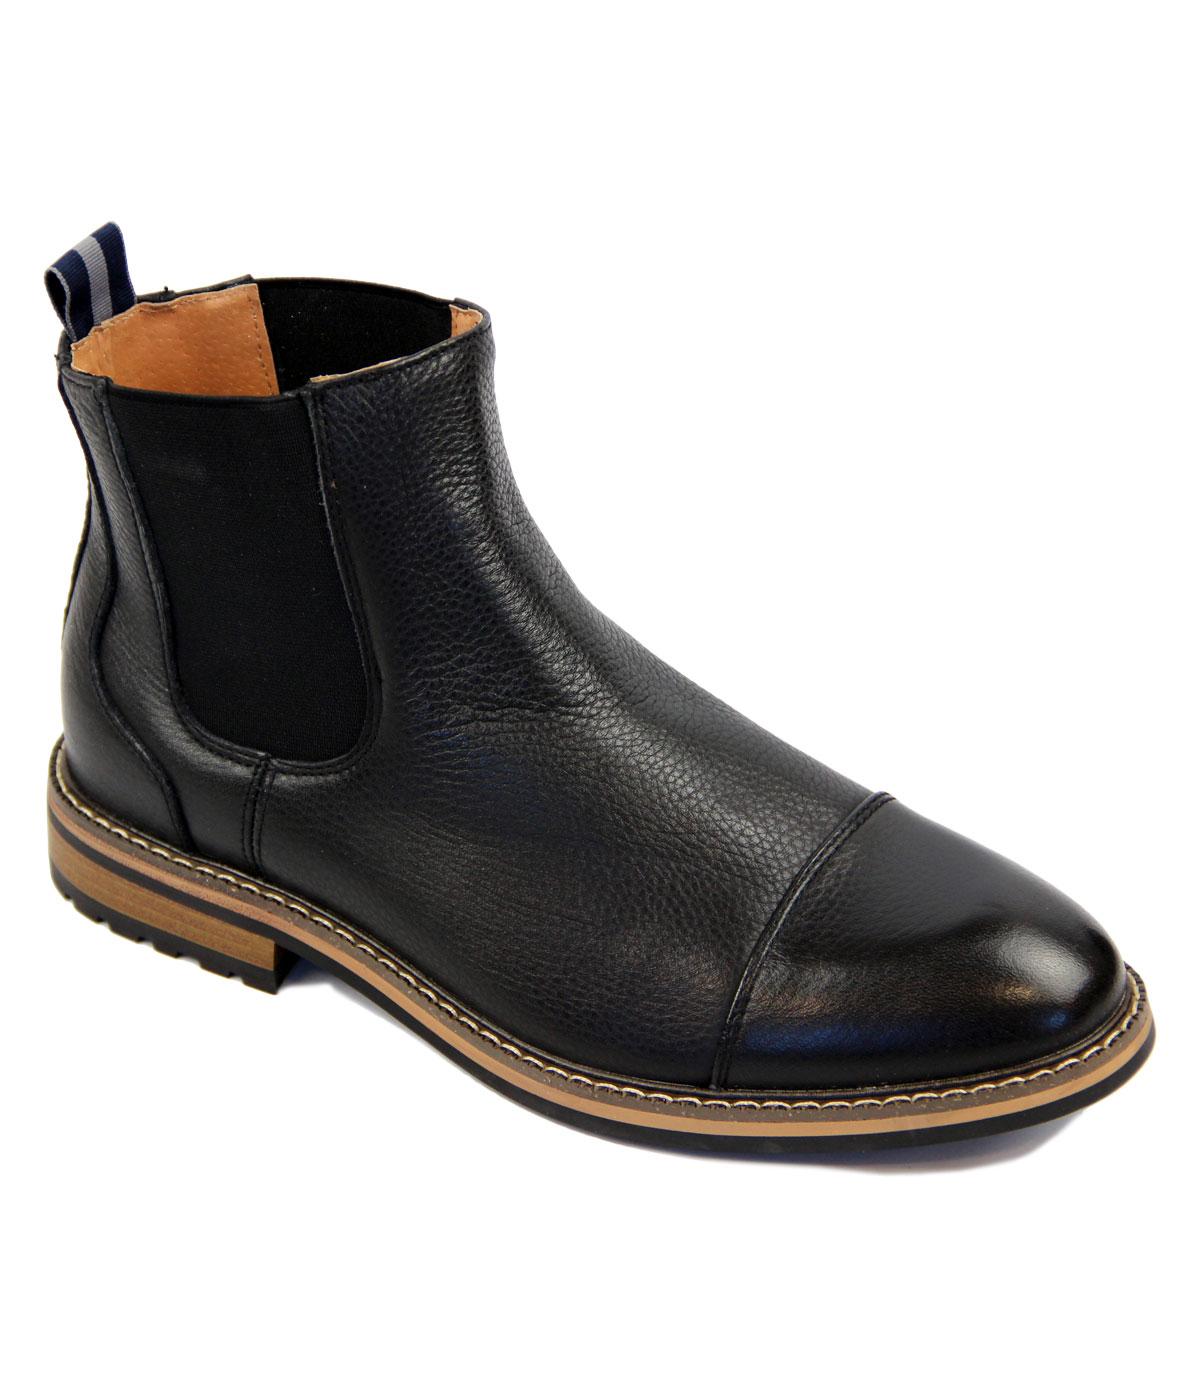 PETER WERTH Retro Mod Toe Leather Chelsea Boots